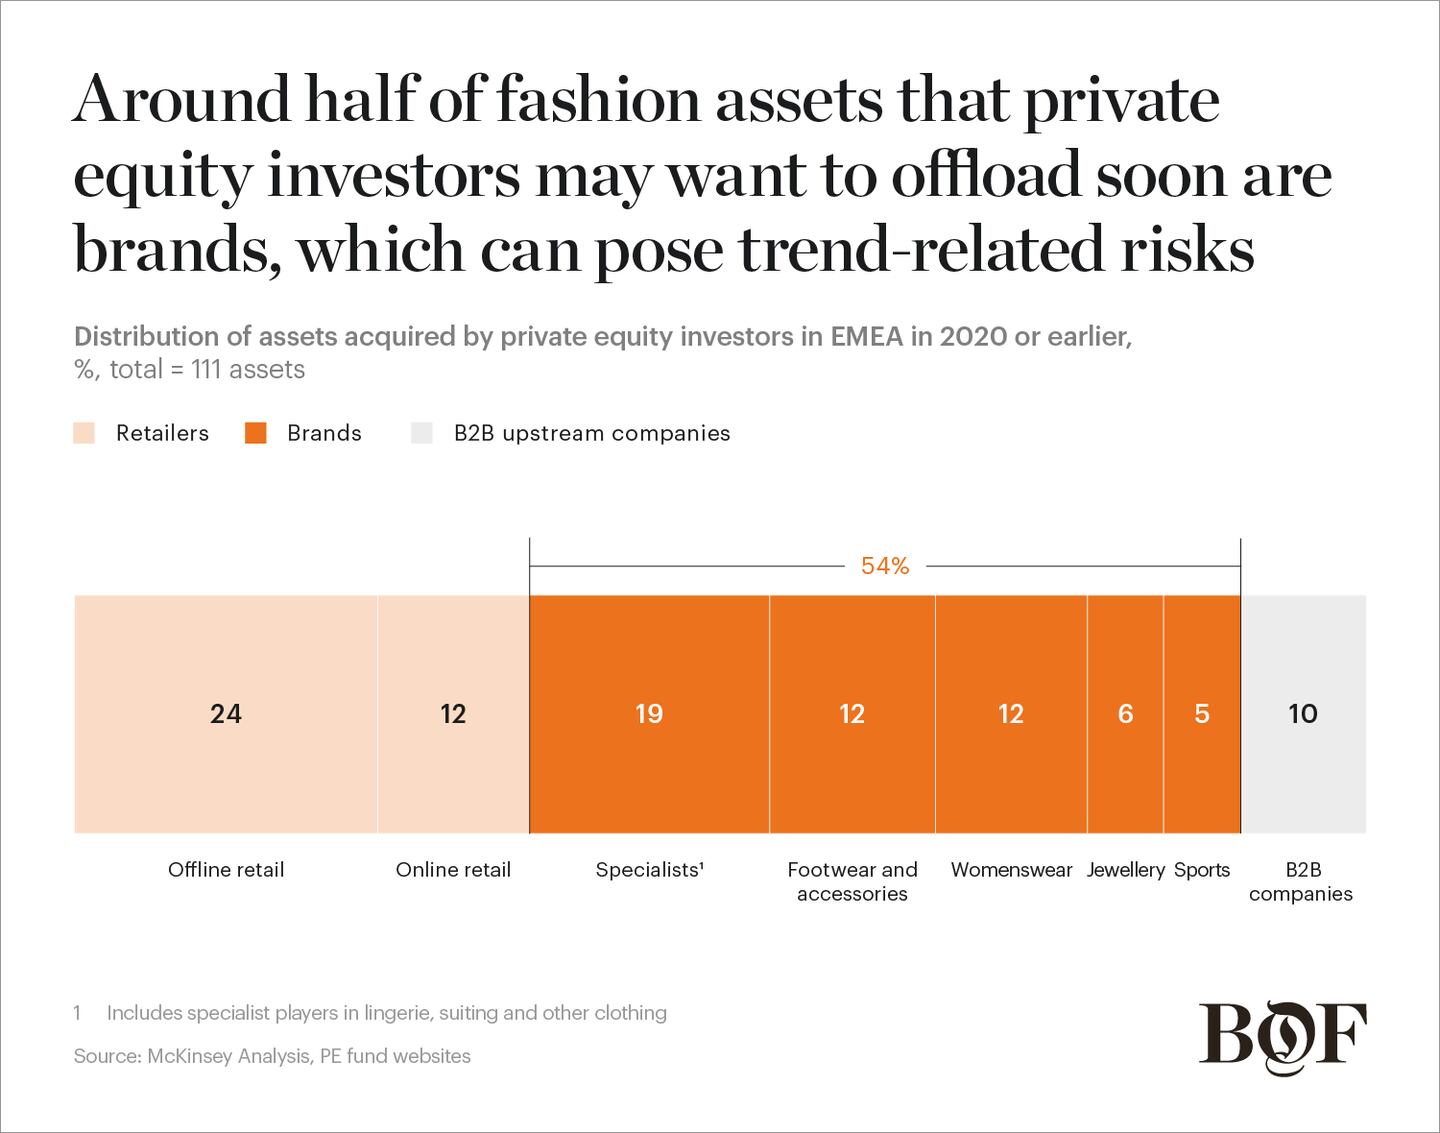 Around half of fashion assets that private equity investors may want
to offload soon are brands, which can pose trend-related risks